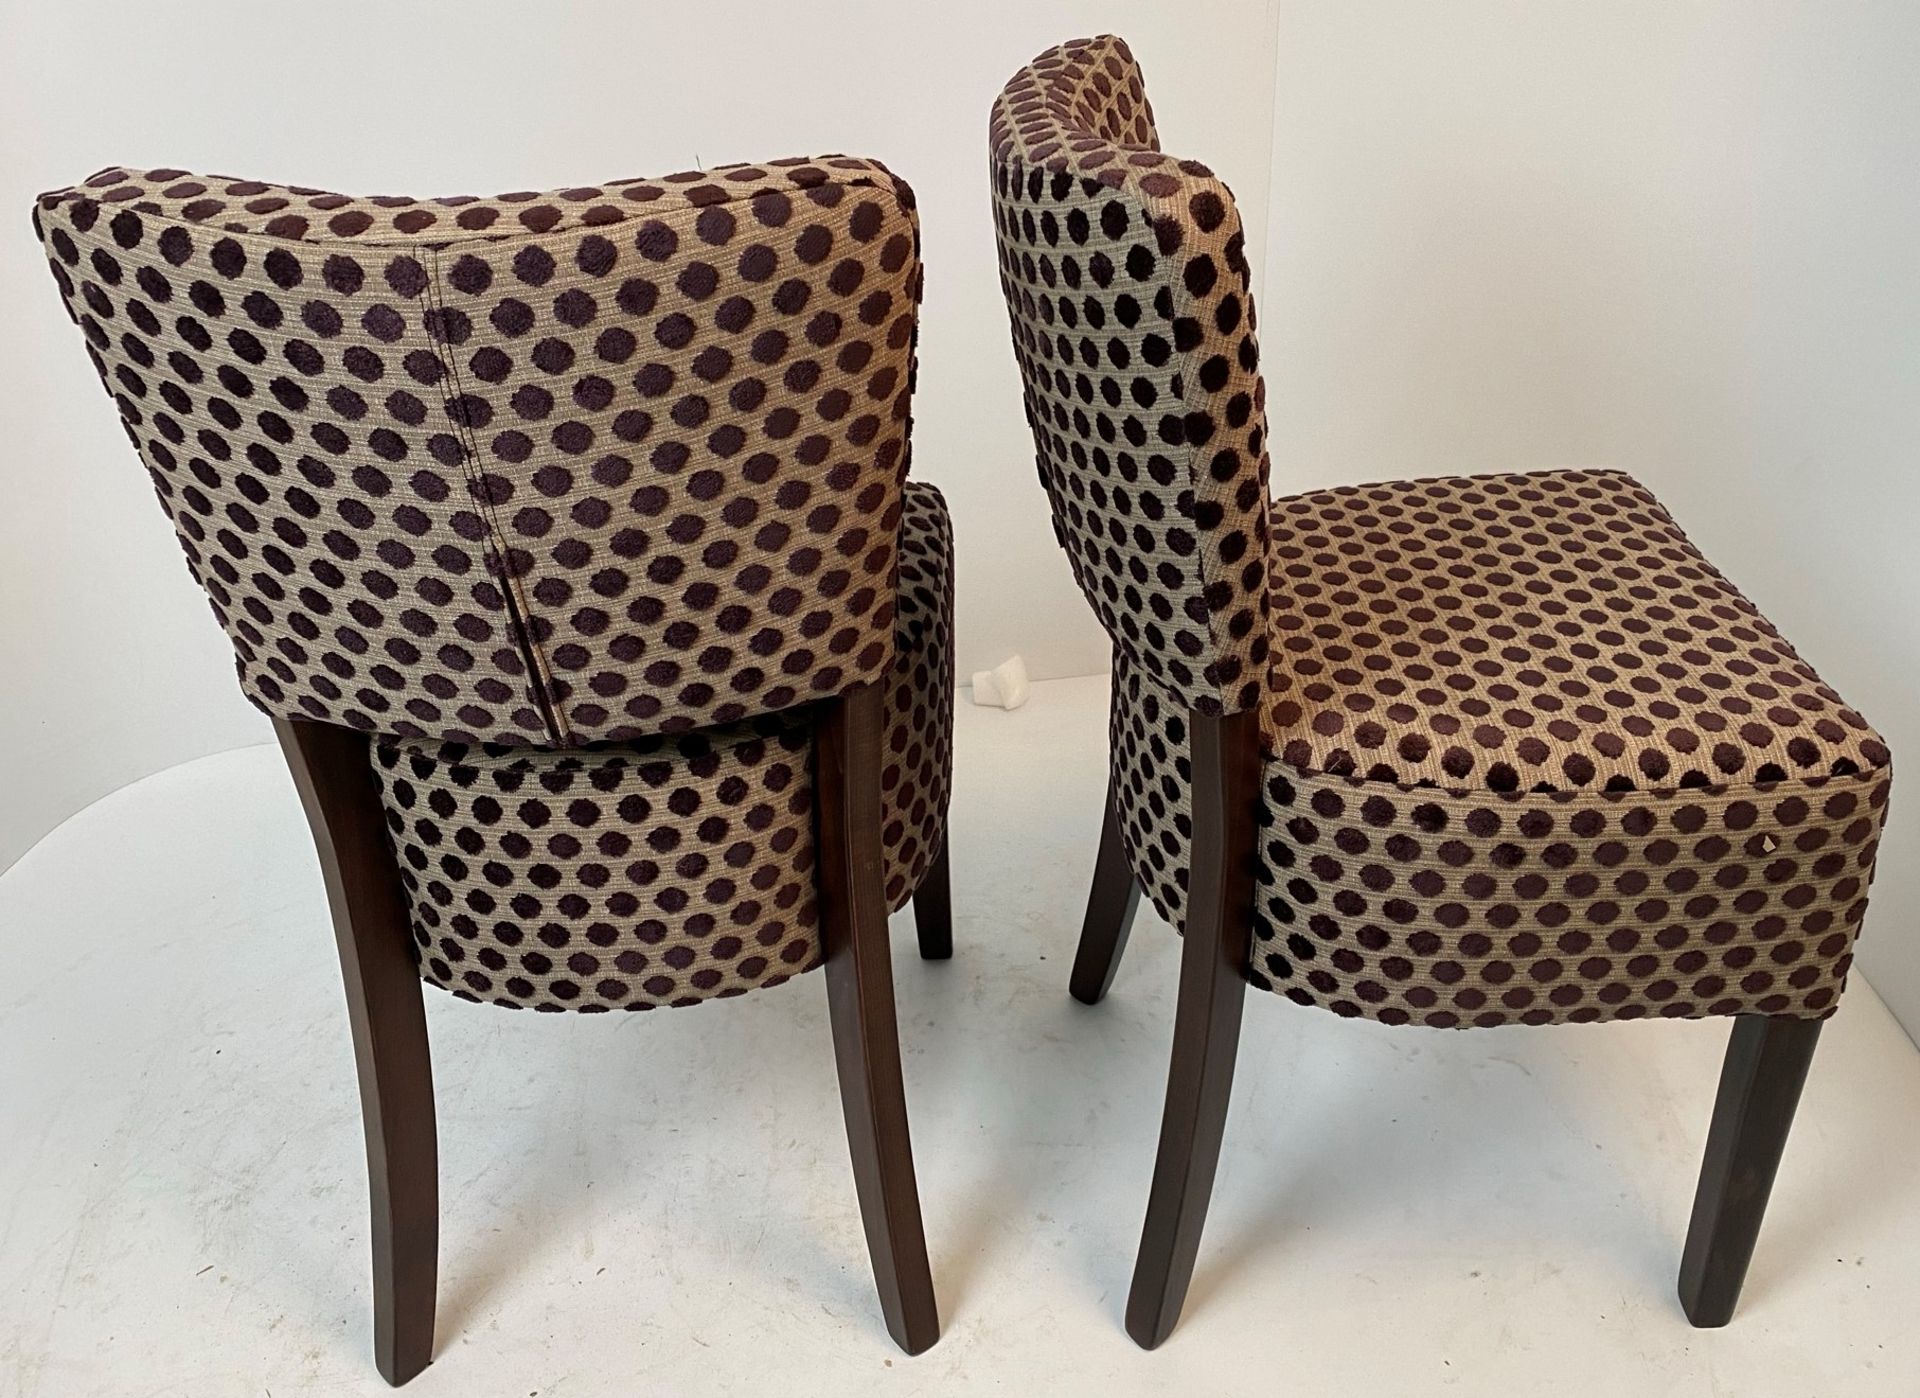 2 x Memphis Eno Aubergine 8102 side/dining chairs with walnut coloured frames - Image 2 of 3